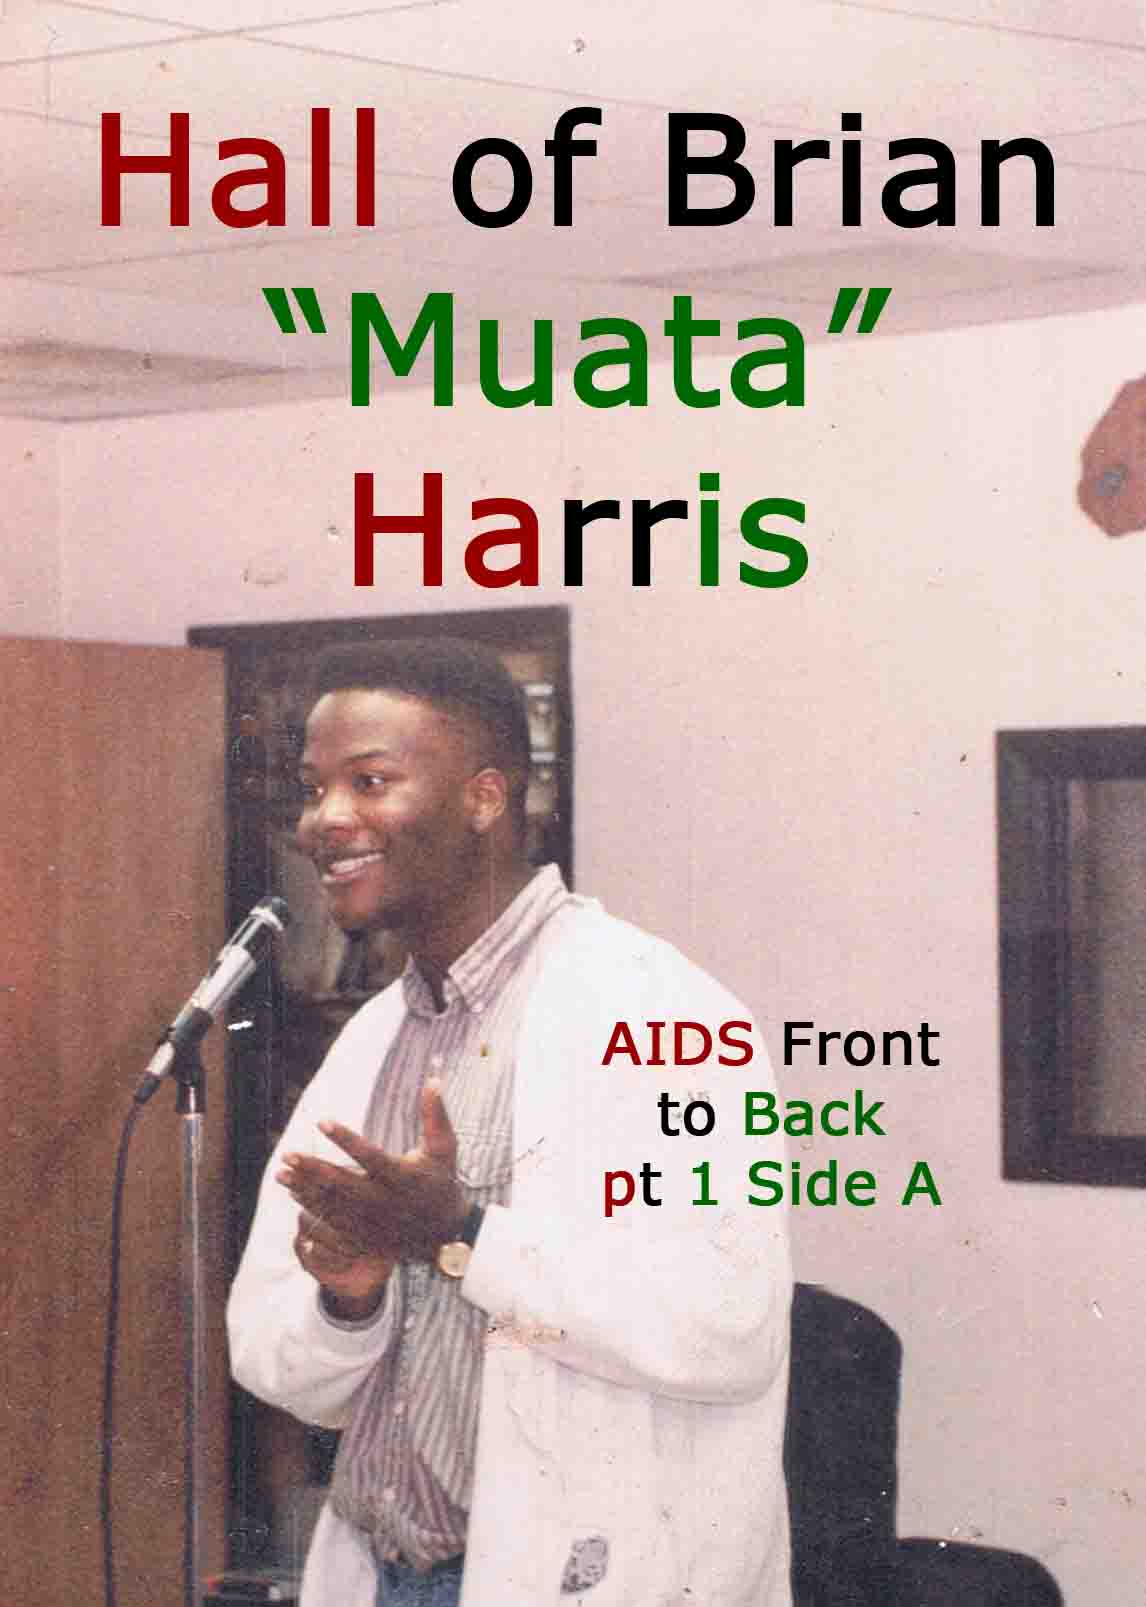 AIDS front to back pt 1 side a